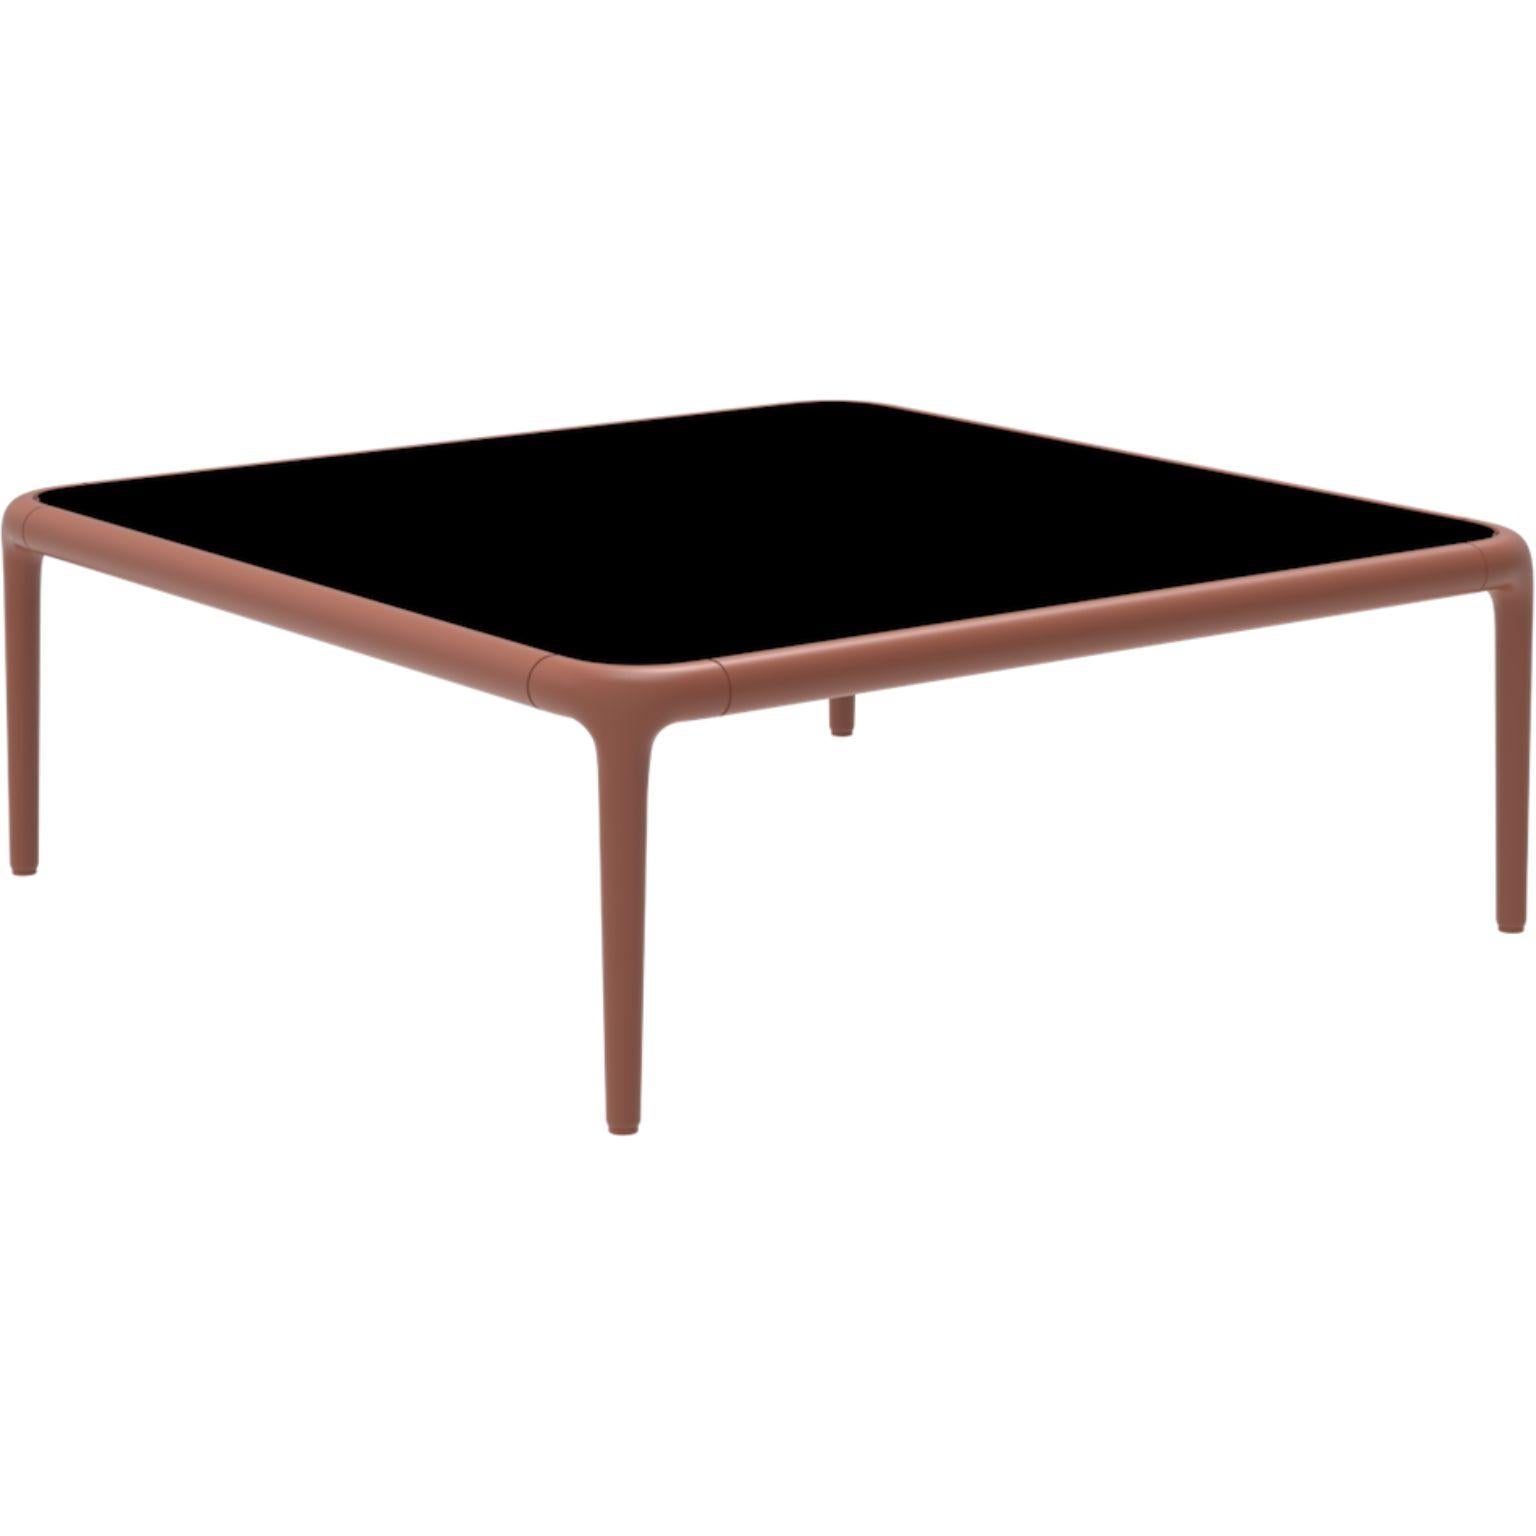 Xaloc salmon coffee table 80 with Glass top by Mowee.
Dimensions: D80 x W80 x H28 cm.
Materials: Aluminum, tinted tempered glass top.
Also available in different aluminum colors and finishes (HPL Black Edge or Neolith). 

Xaloc synthesizes the